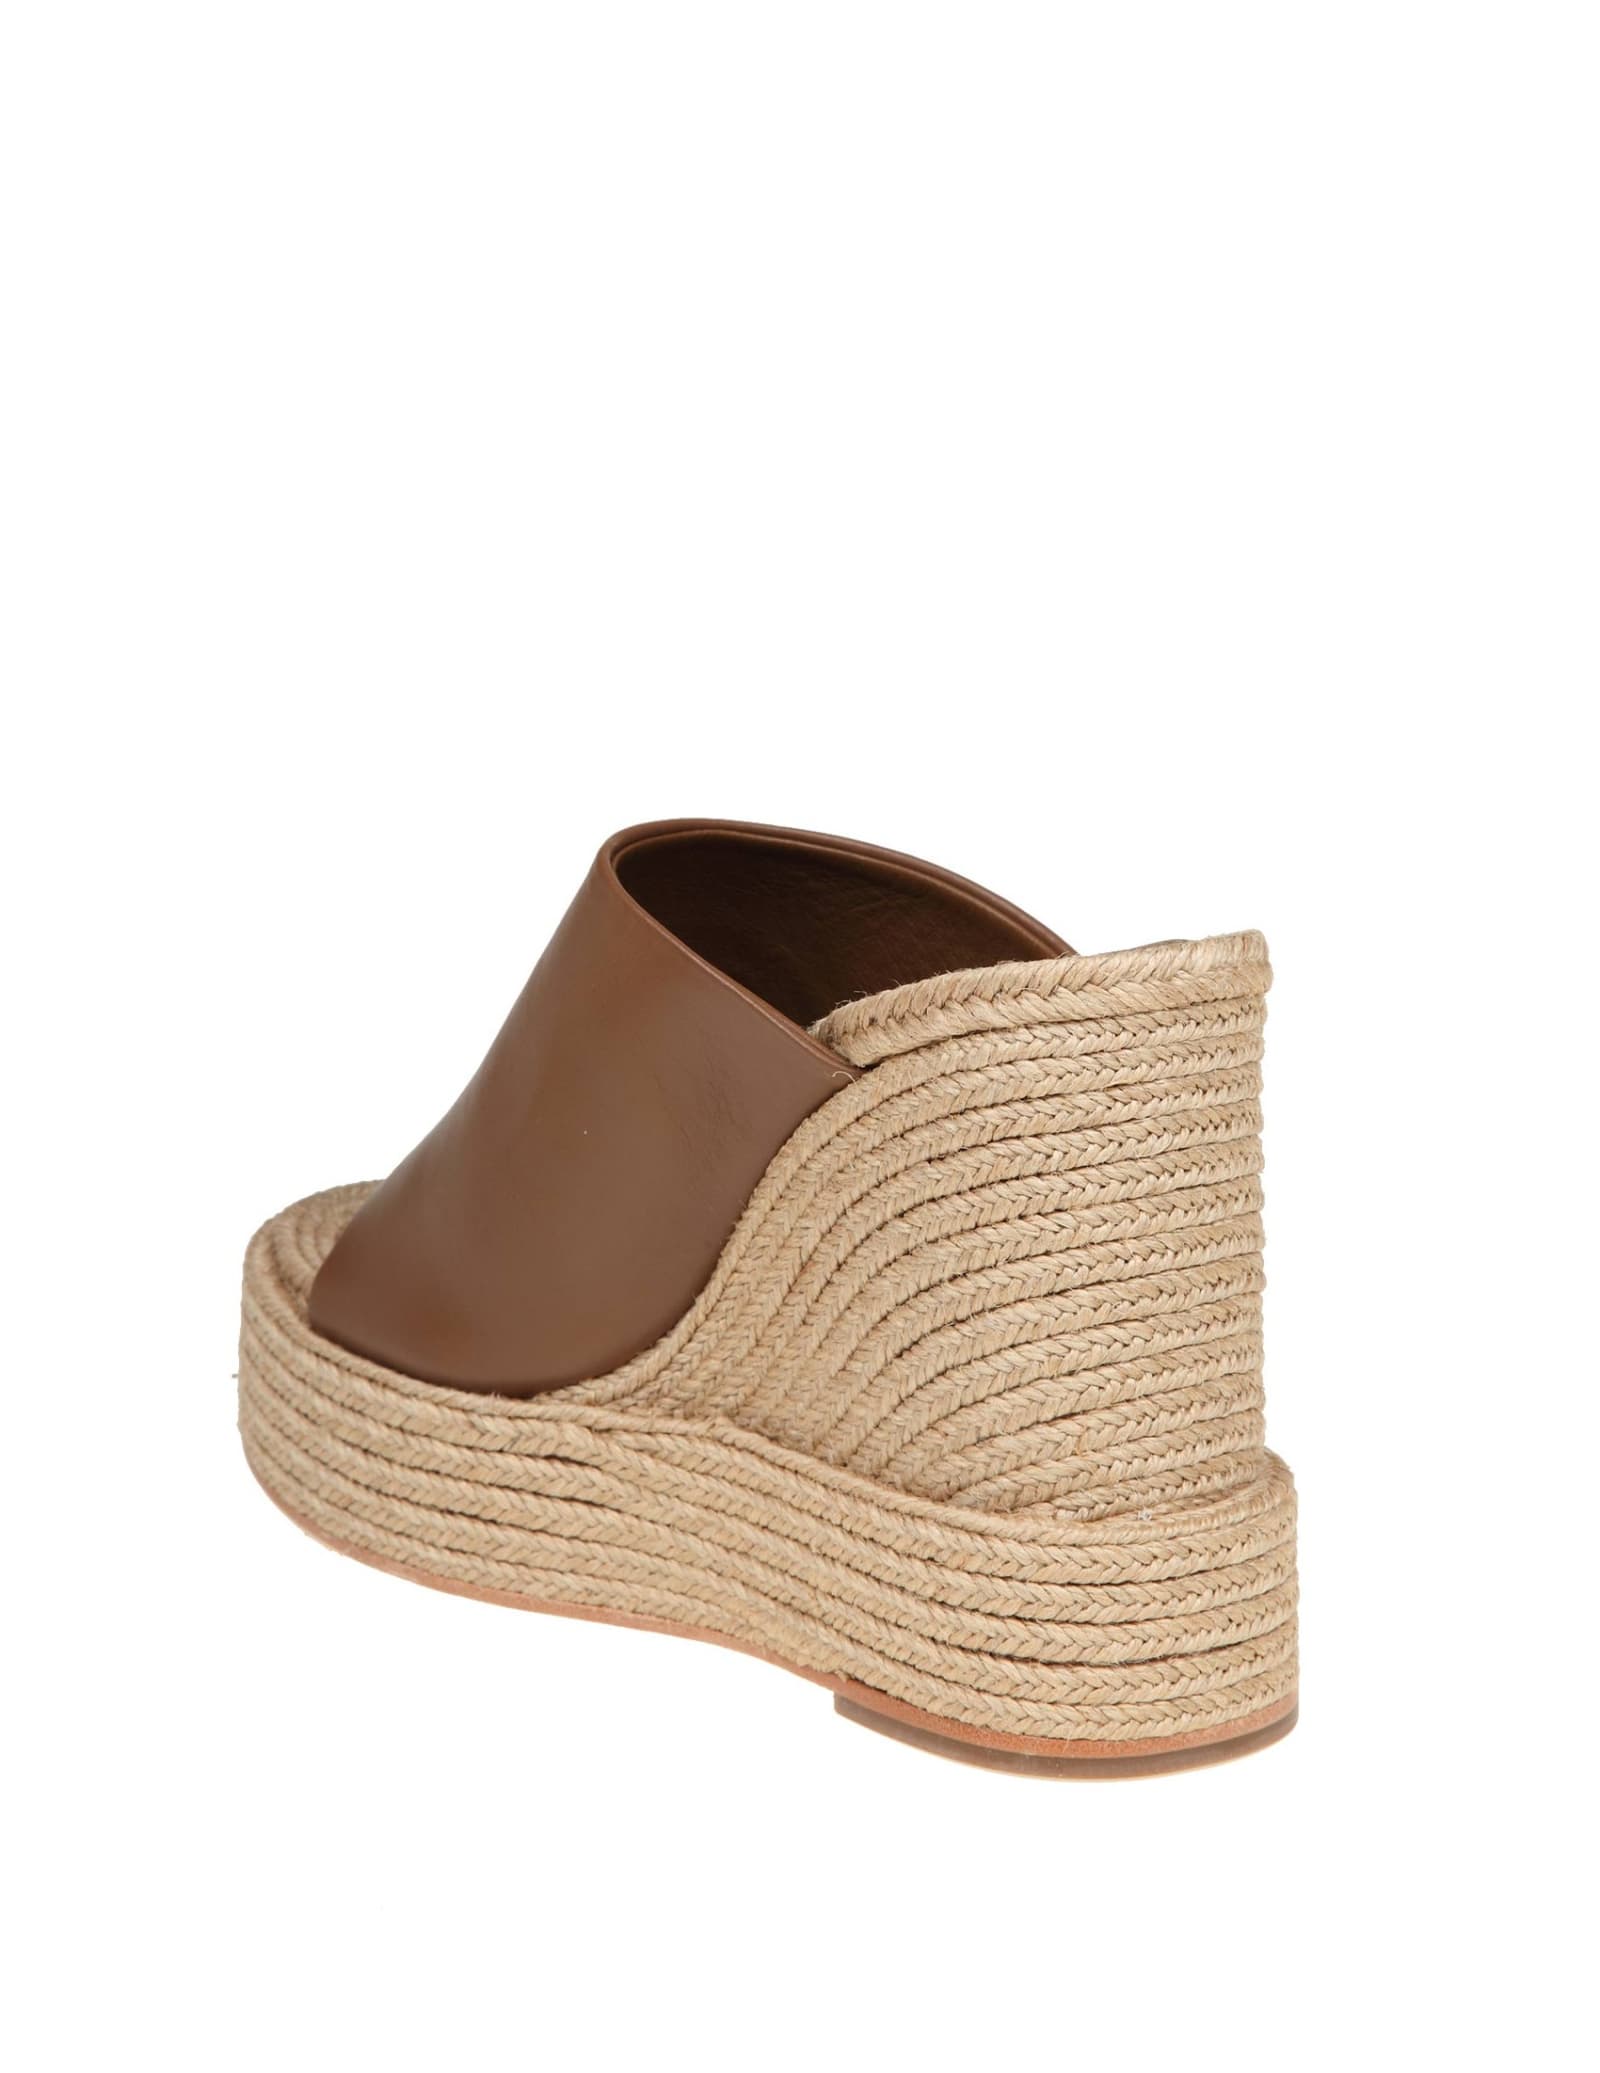 Shop Paloma Barceló Camila Wedge Sandal In Leather Color